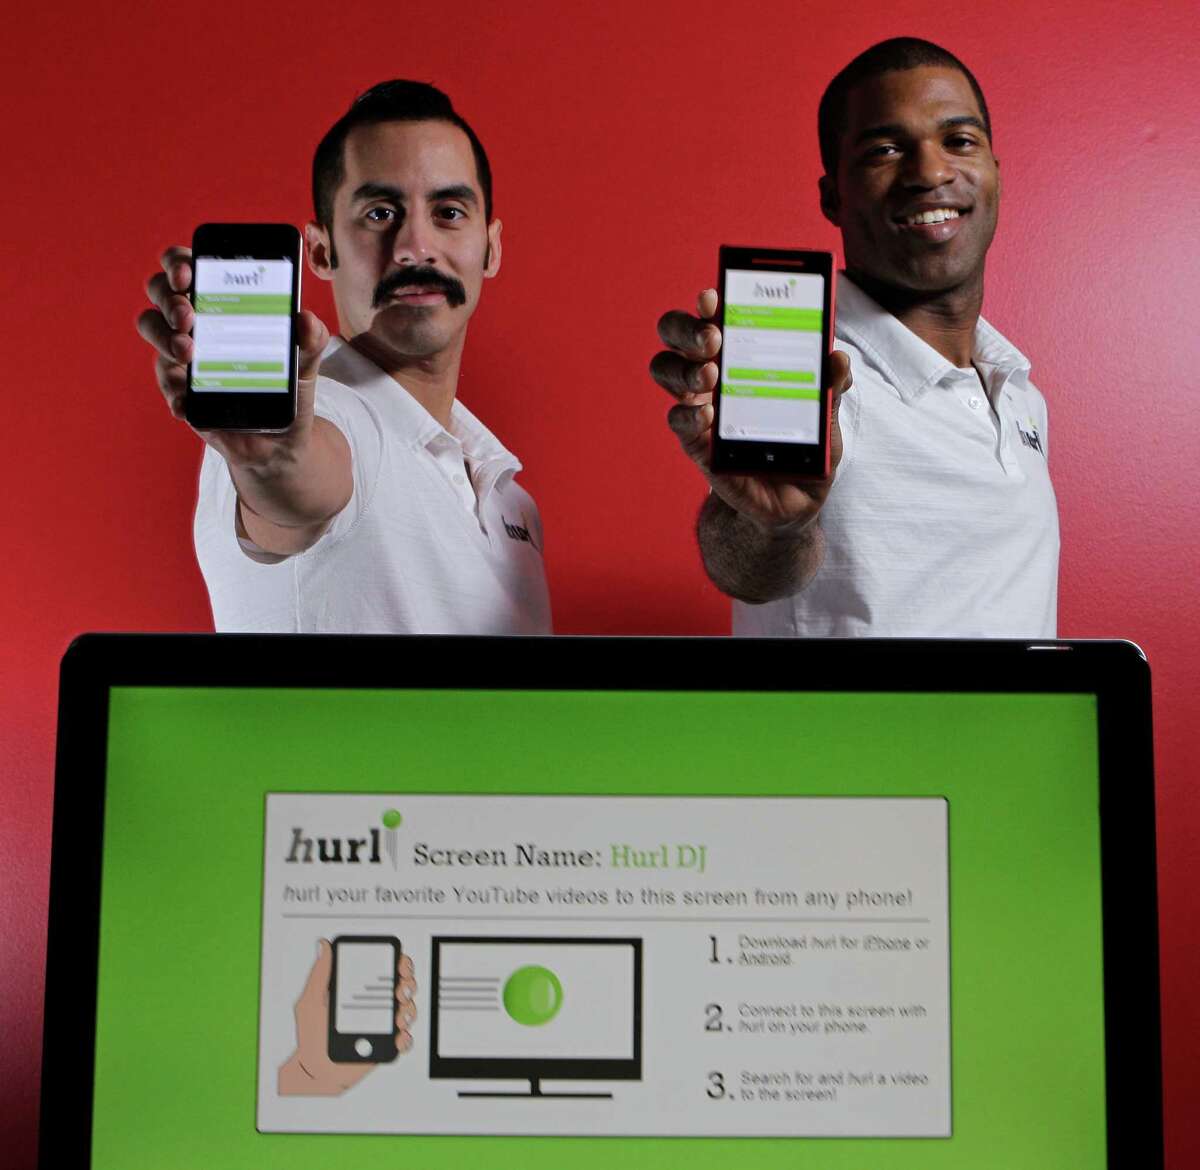 Naaman Esquivel, left, and Lawrence Johnson, right, founders of Hurl pose at the Houston Technology Center, 410 Pierce Street, Tuesday, Jan. 15, 2013, in Houston. Hurl is an app that lets users launch videos from their phone onto any screen that's wired to the internet. ( Melissa Phillip / Houston Chronicle )